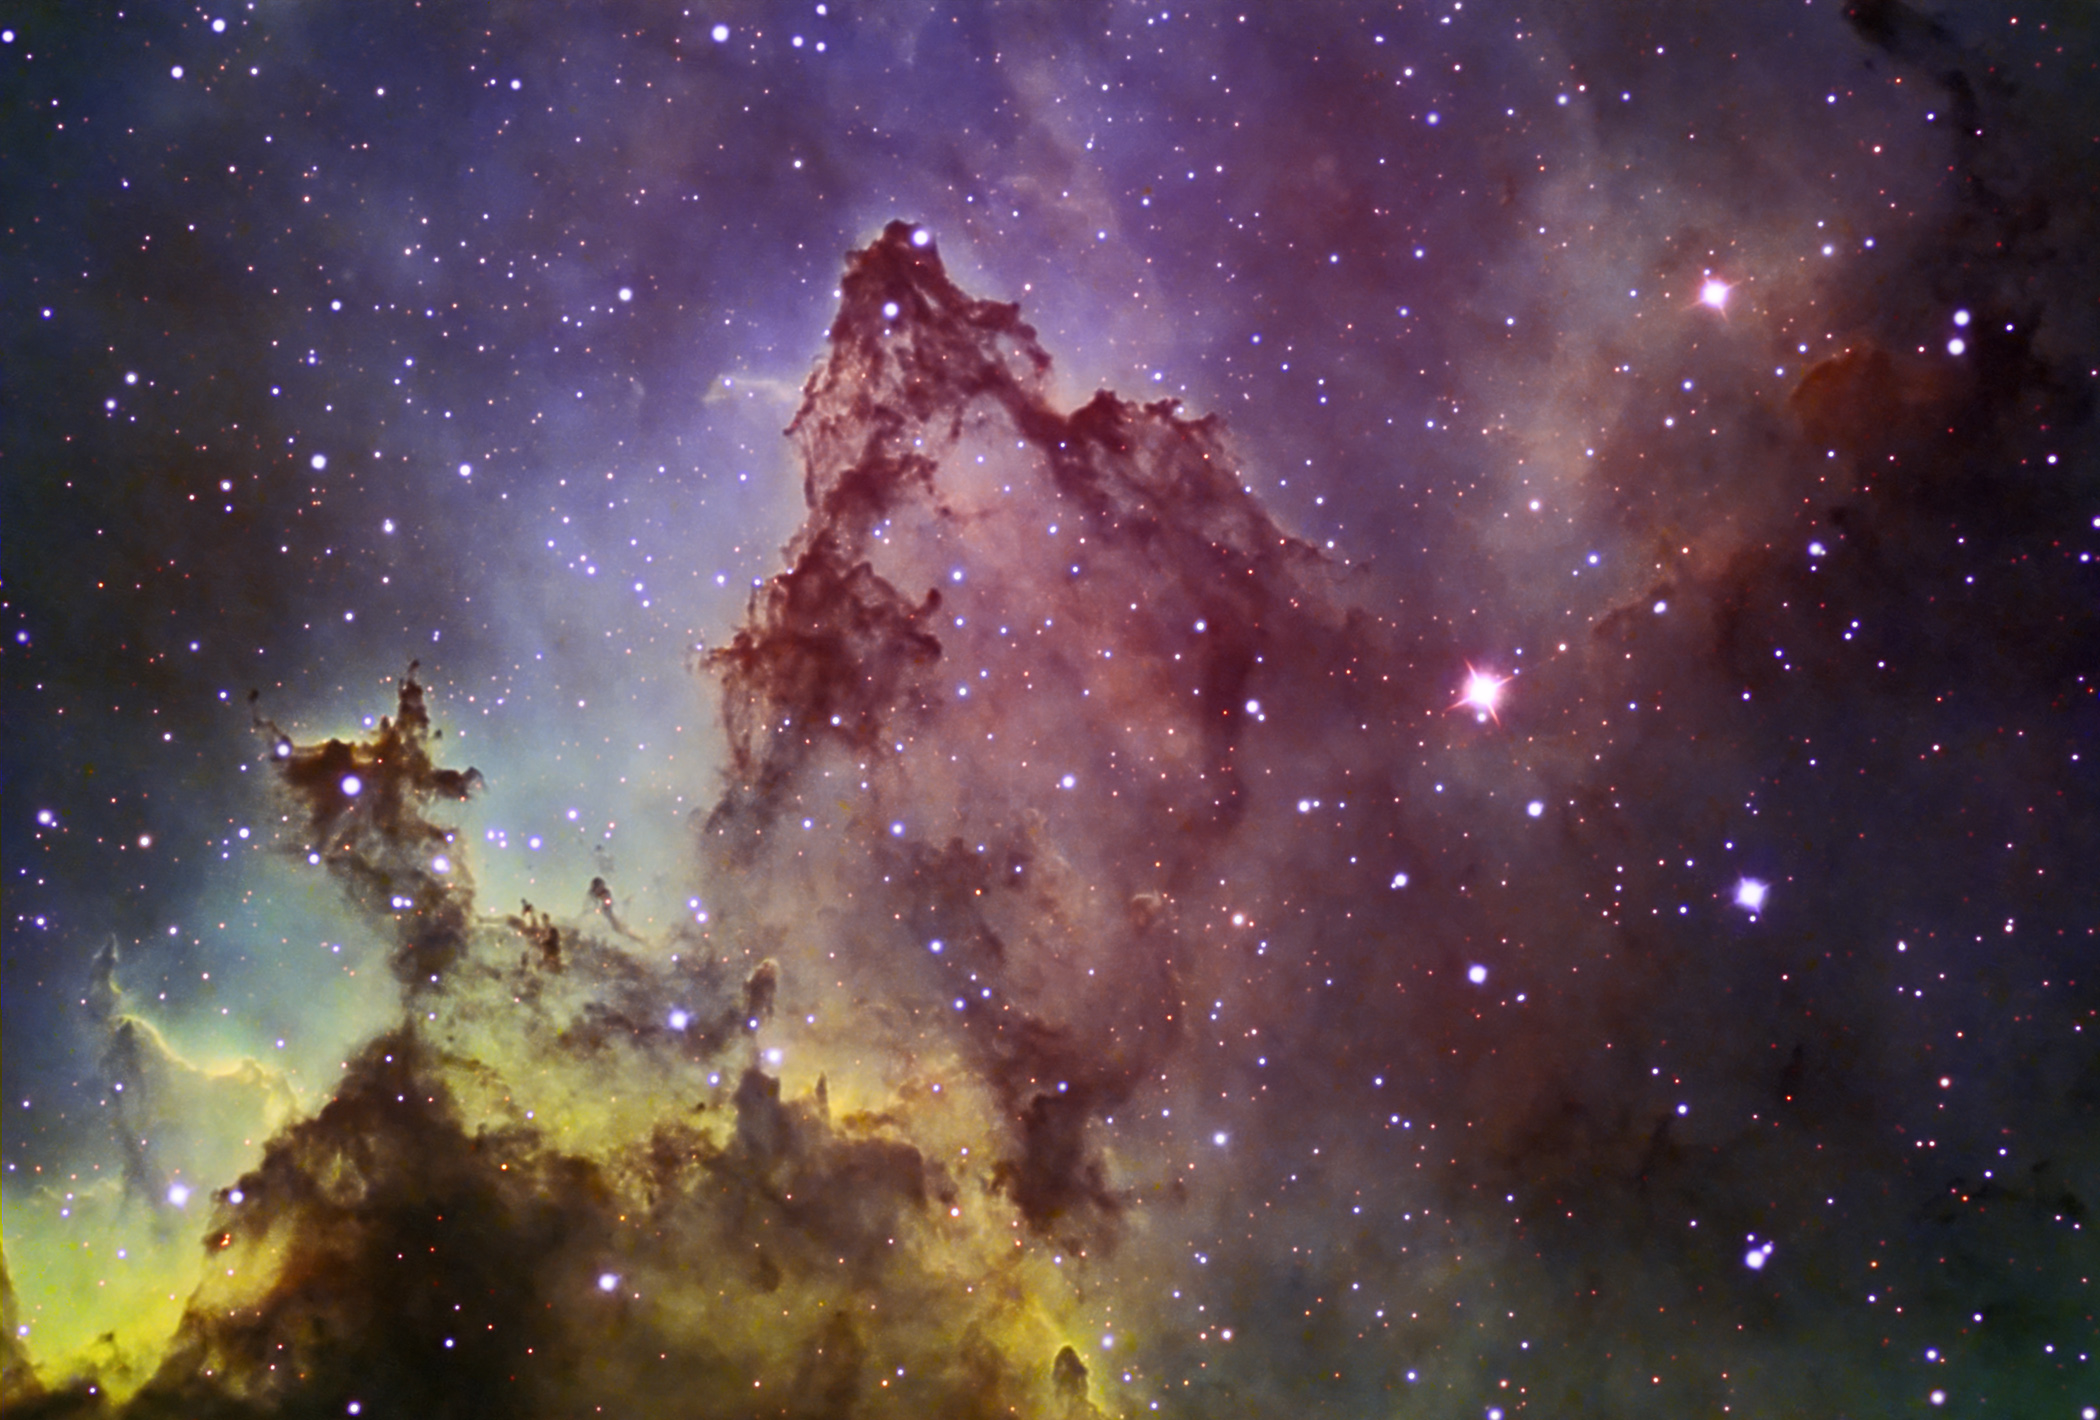 High Resolution Image Using Astrodon Narrowband Filters Of One Part